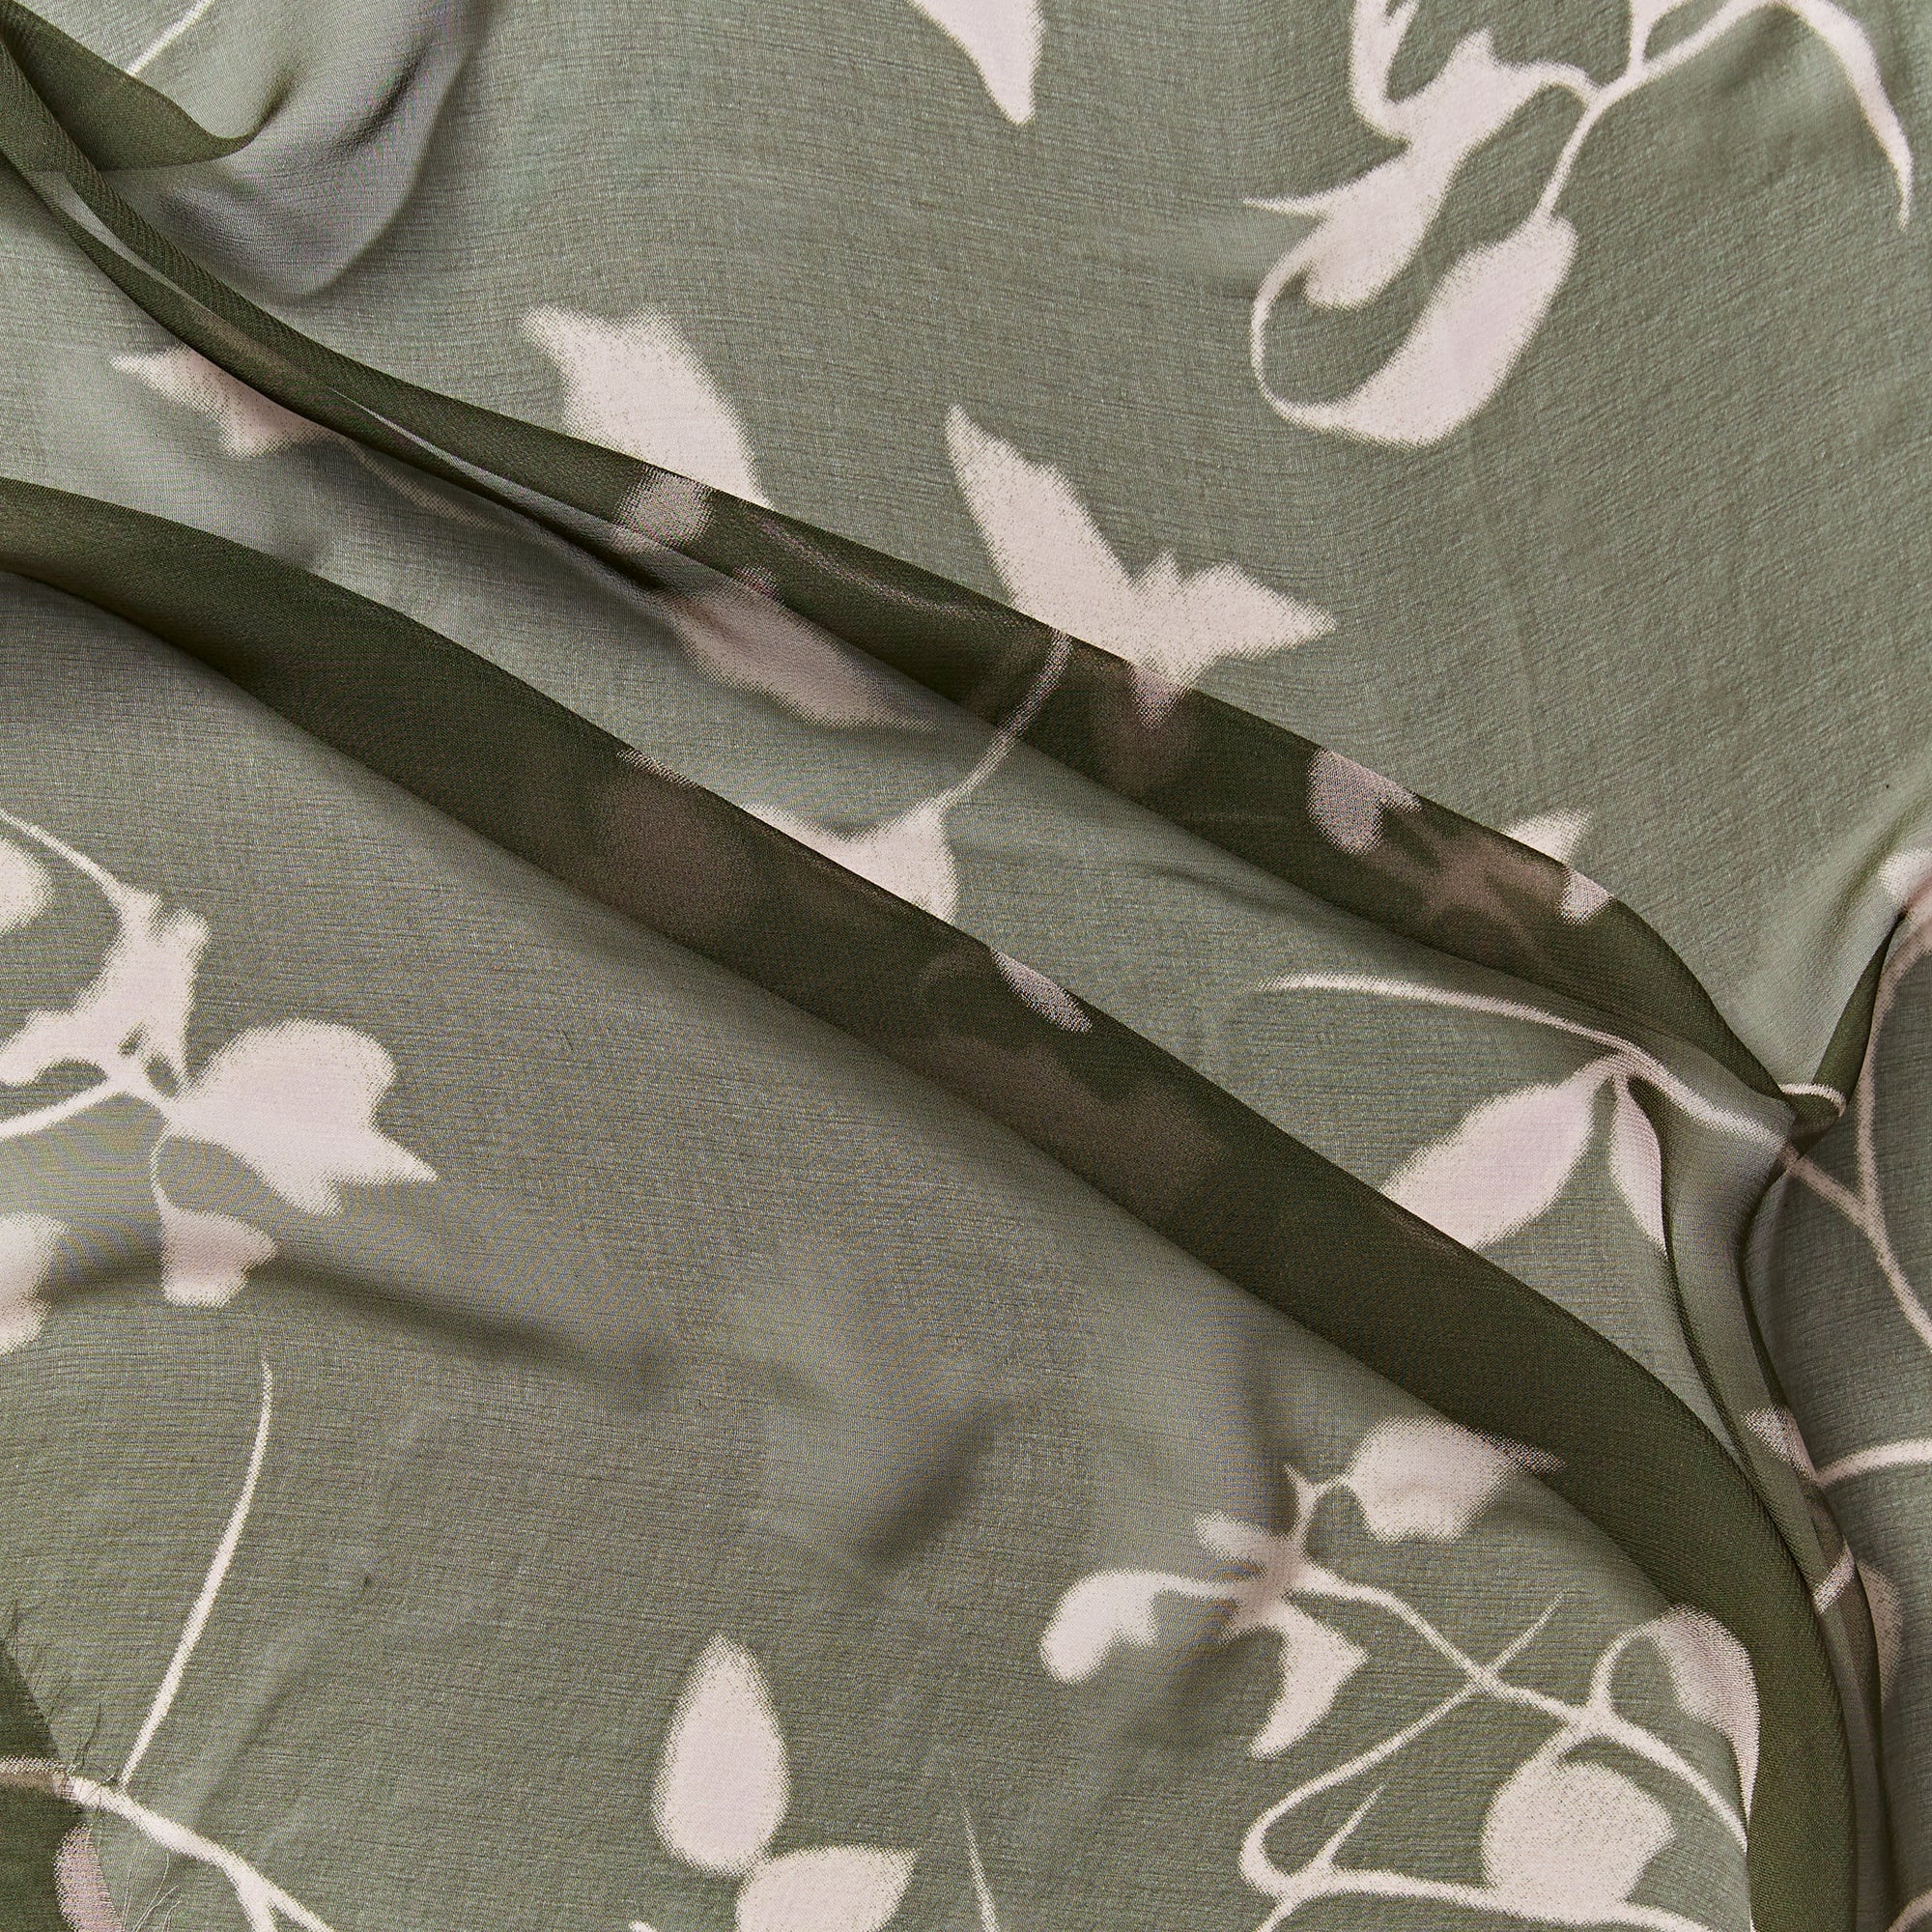 sublime illustrating the khaki  floral print on khaki color version of a sheer pure silk georgette with fluid drape